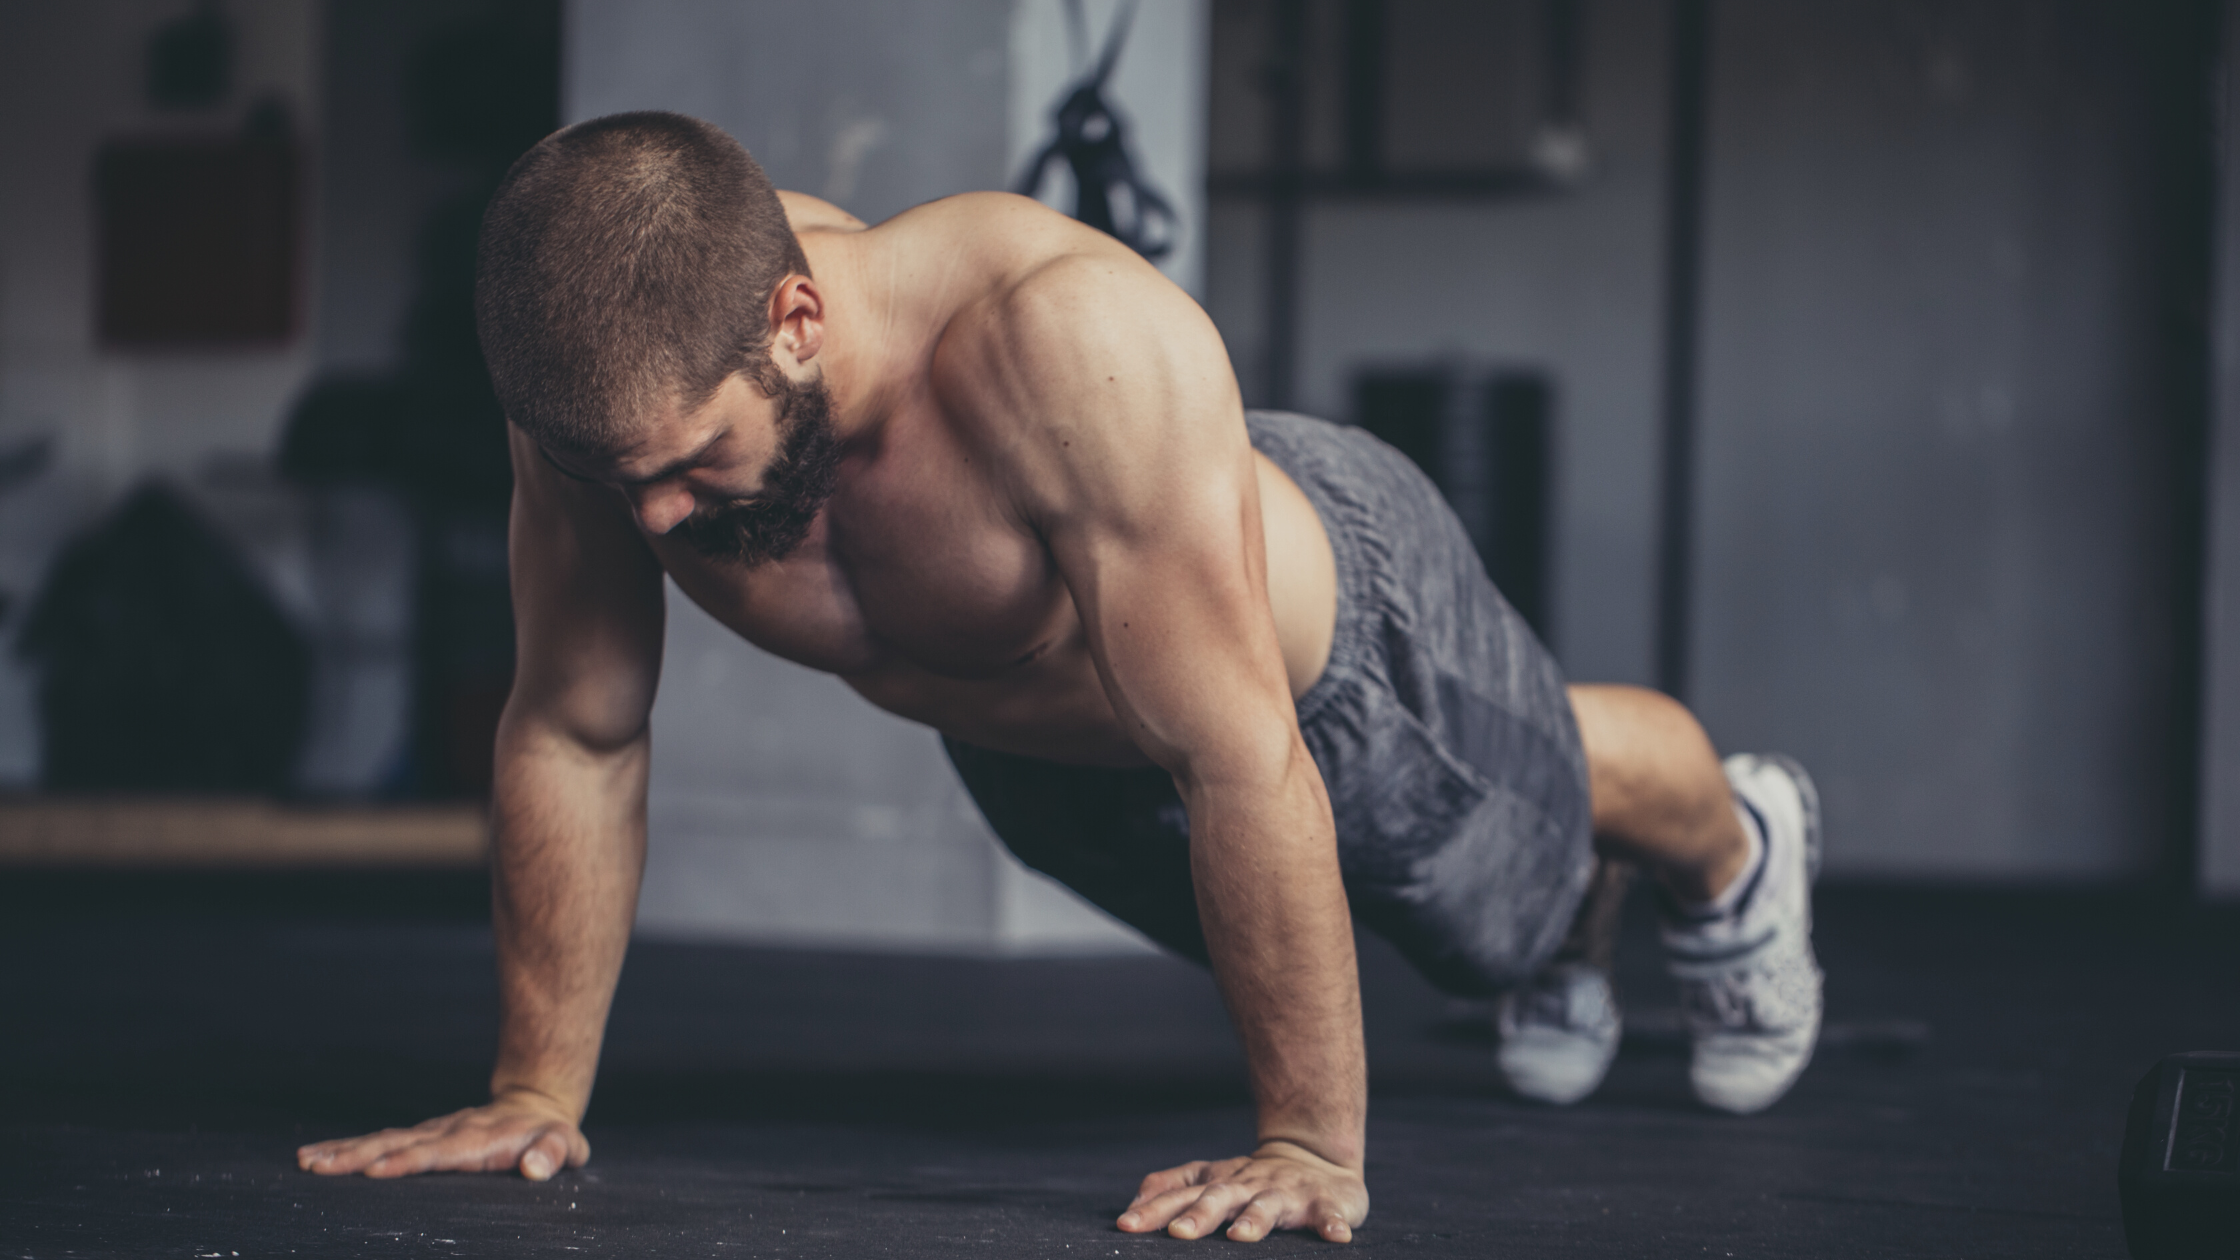 15 No-Equipment CrossFit Home Workouts [With PDF] - Fittest Travel